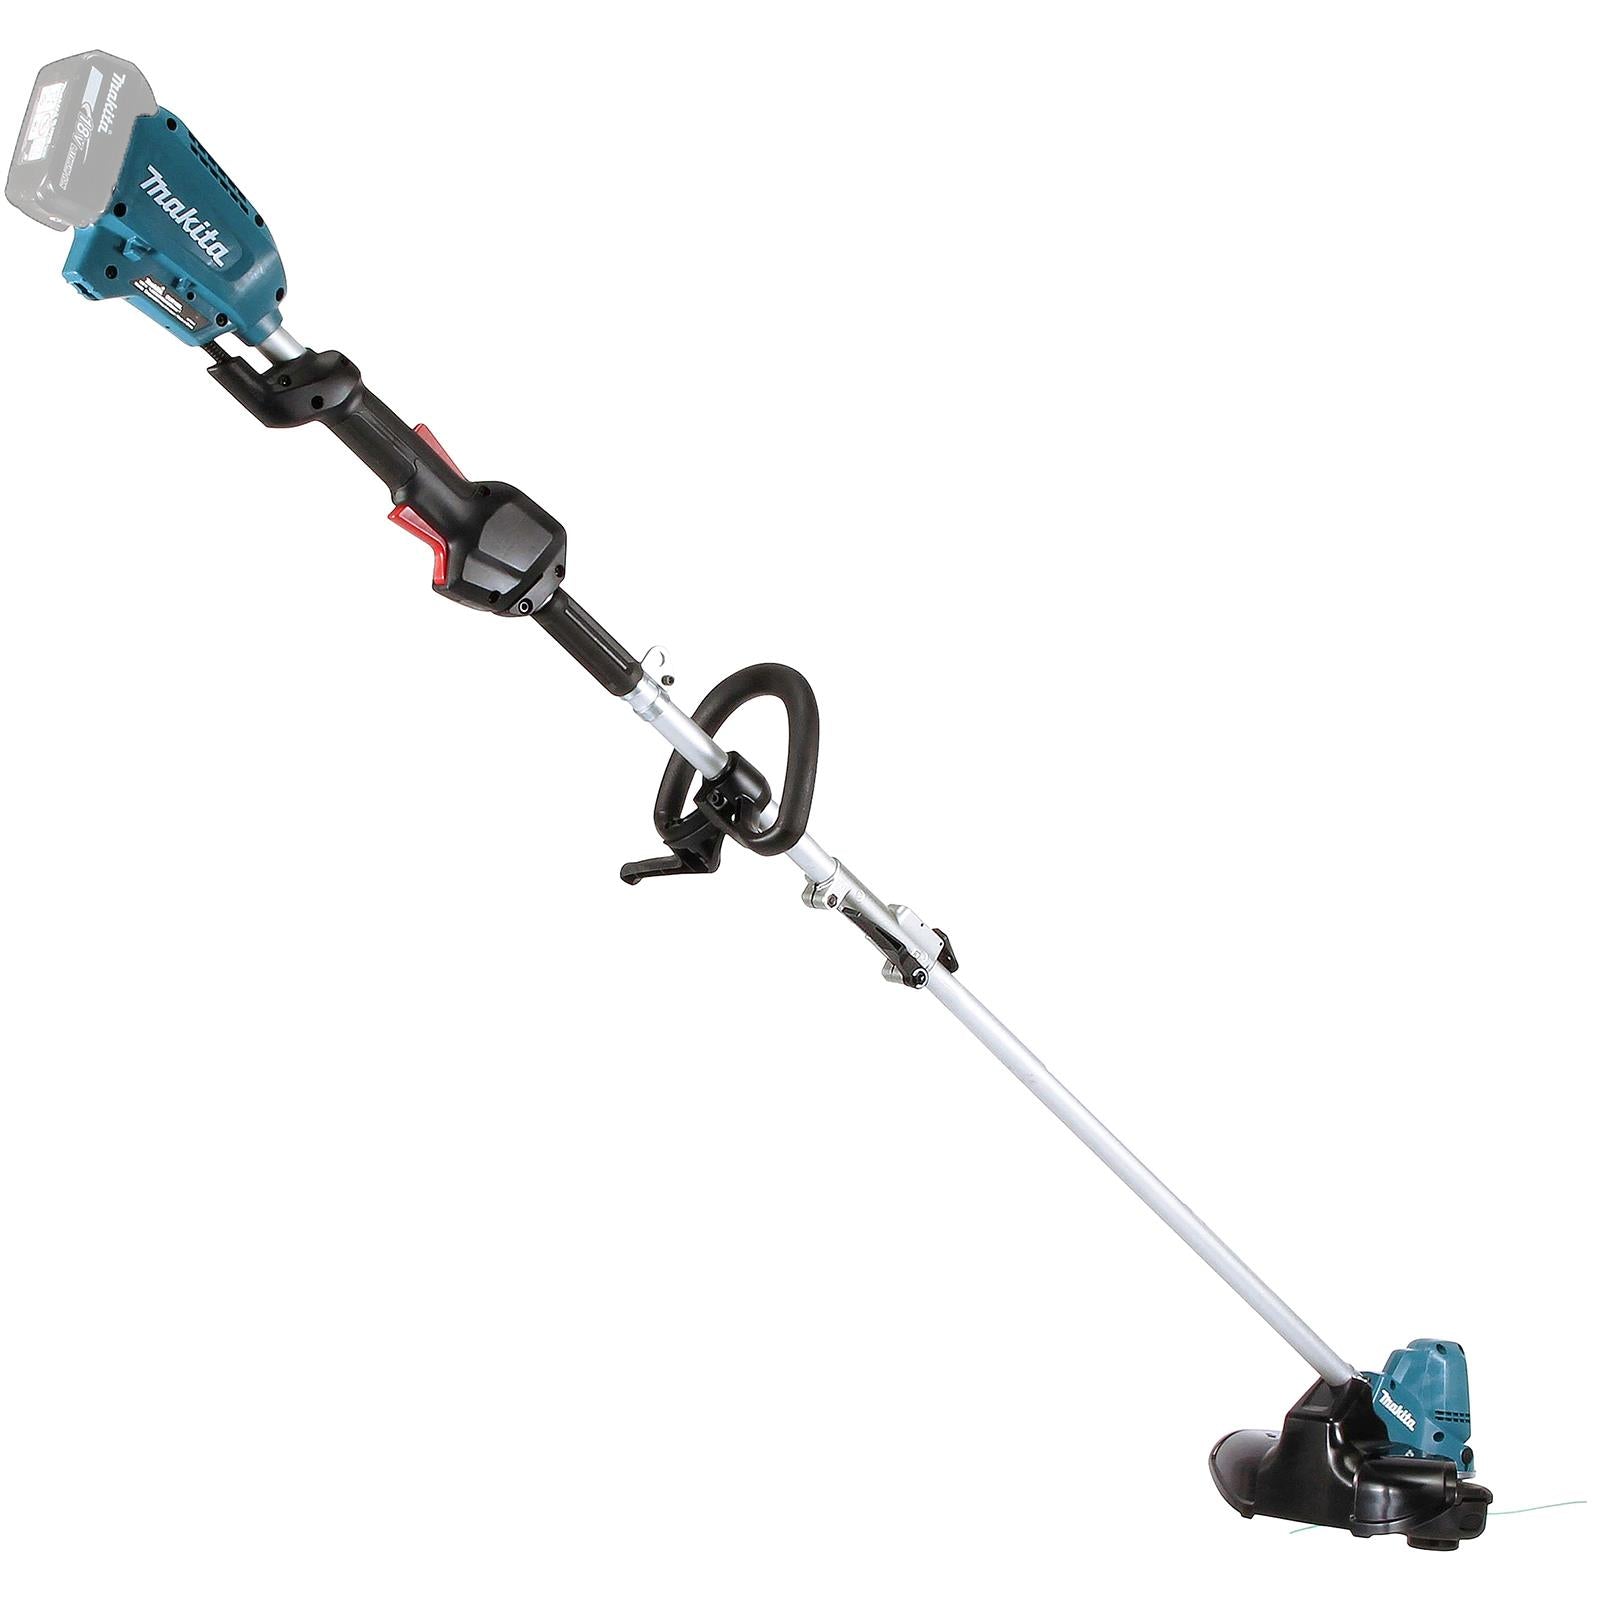 Makita Line Trimmer Strimmer 18V LXT Brushless Cordless Garden Lawn Strimming Bare Unit Body Only DUR191LZX3